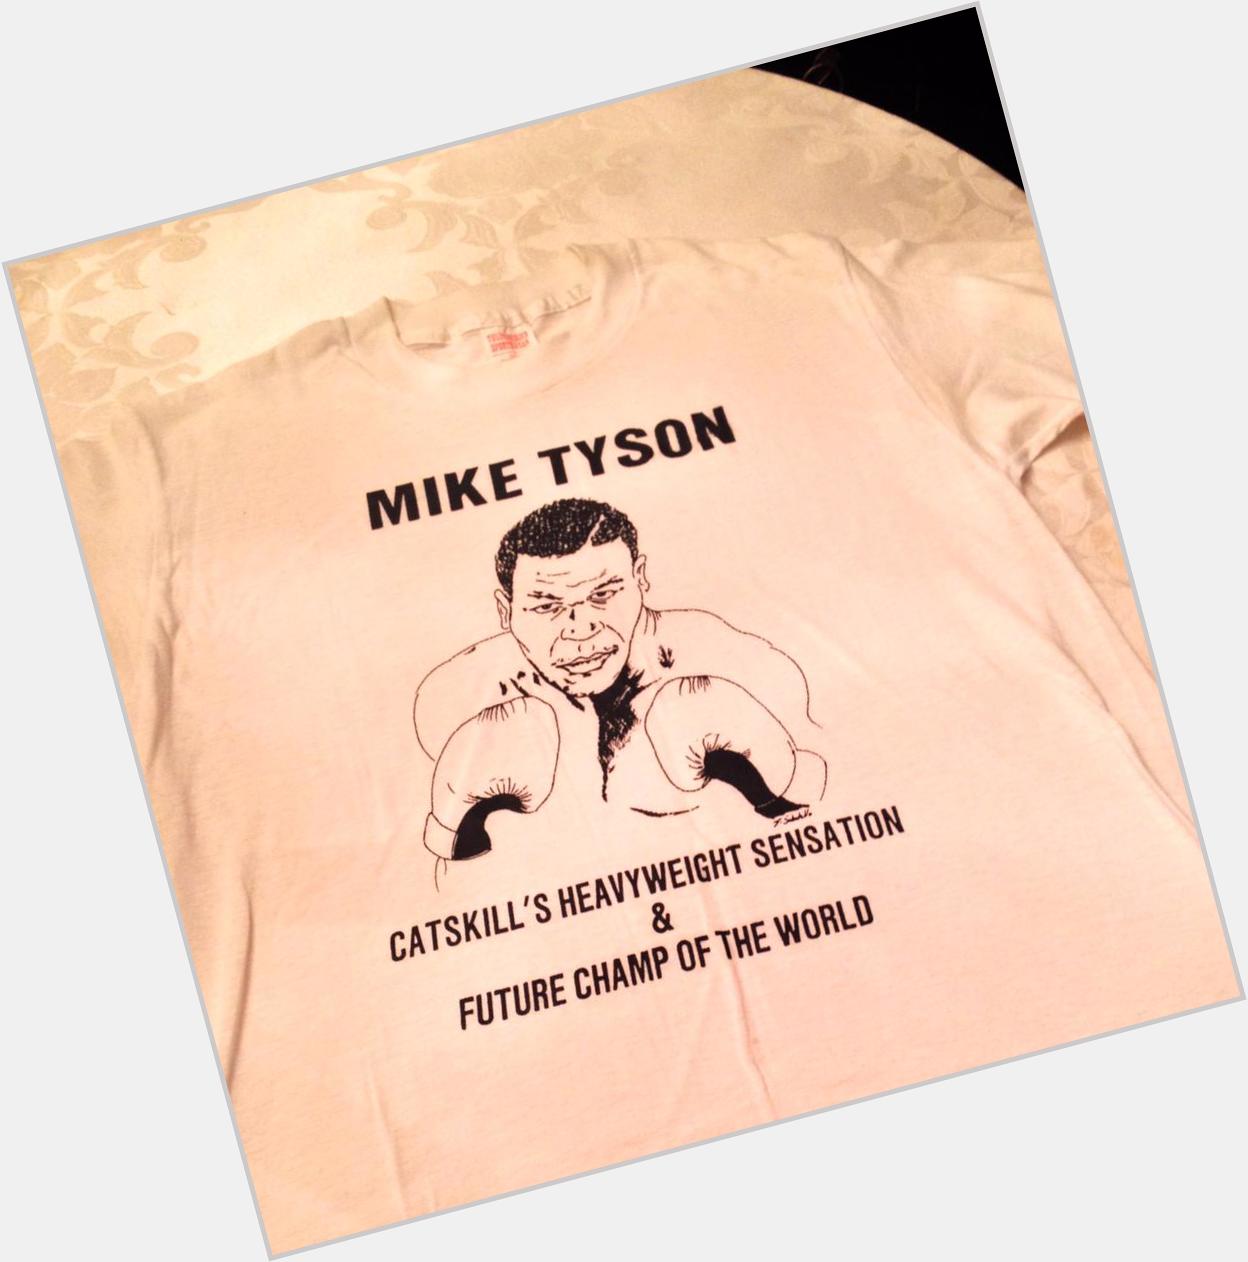  Happy Birthday Mike Tyson!  I have been a fan since this tee shirt! 